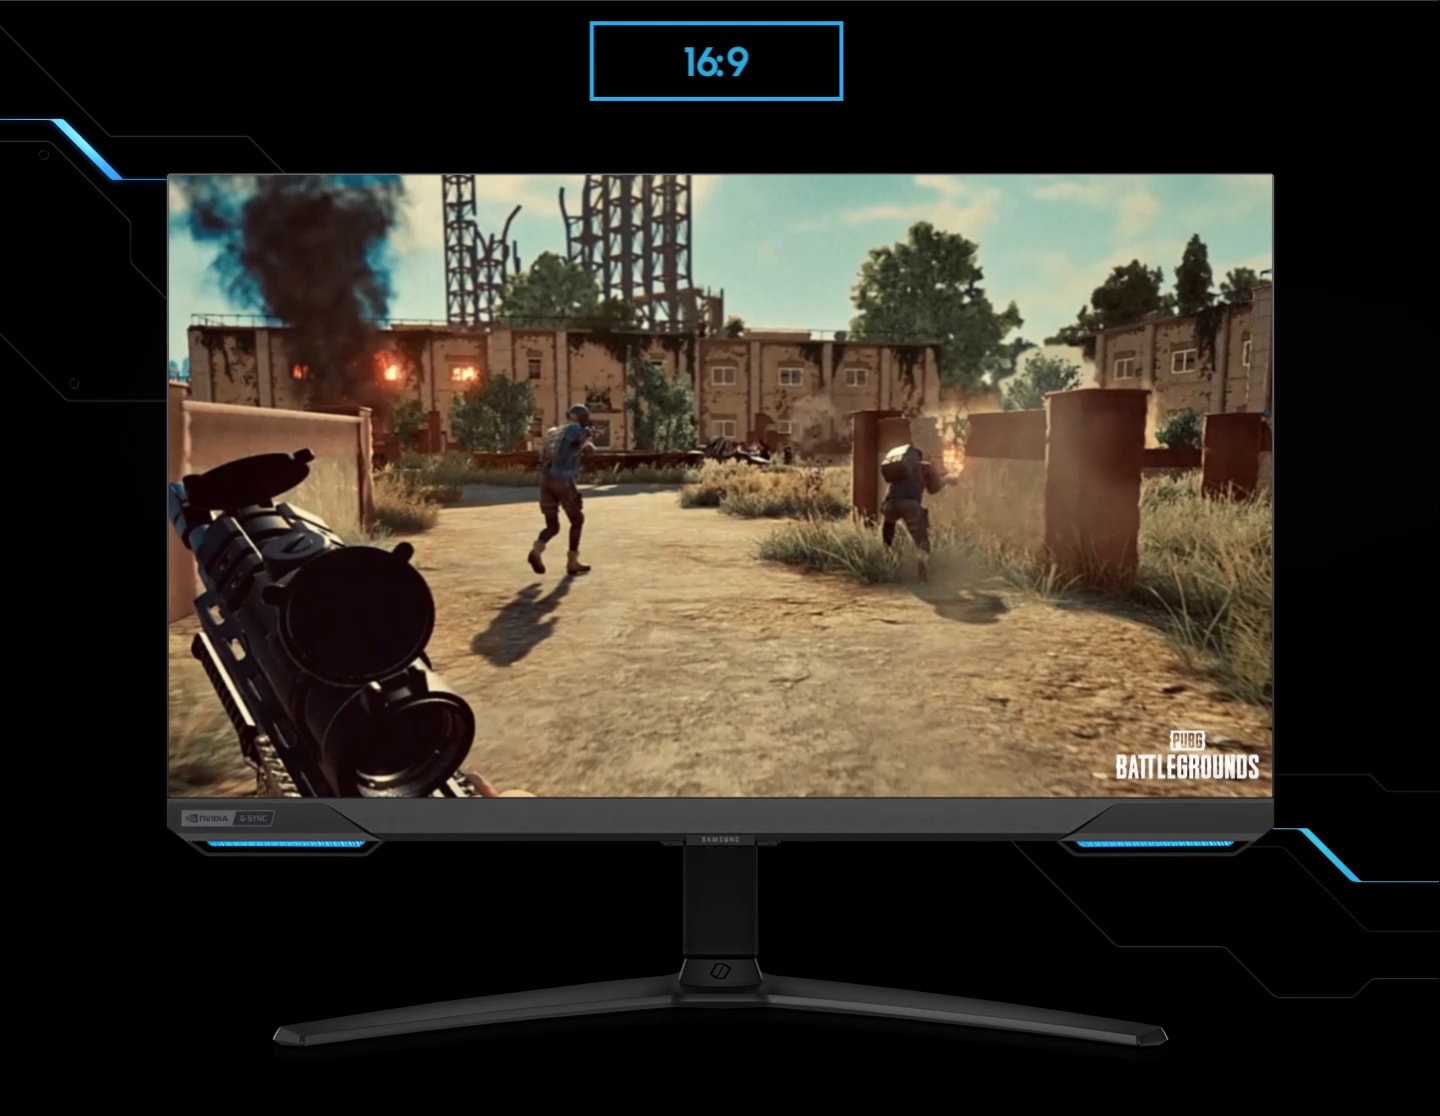 A monitor shows the perspective of a player within a first-person action game. As the screen is extended from 16:9 to 21:9 proportion, an enemy appears in the far left corner, revealed thanks to the monitor's wider perspective. The game title 